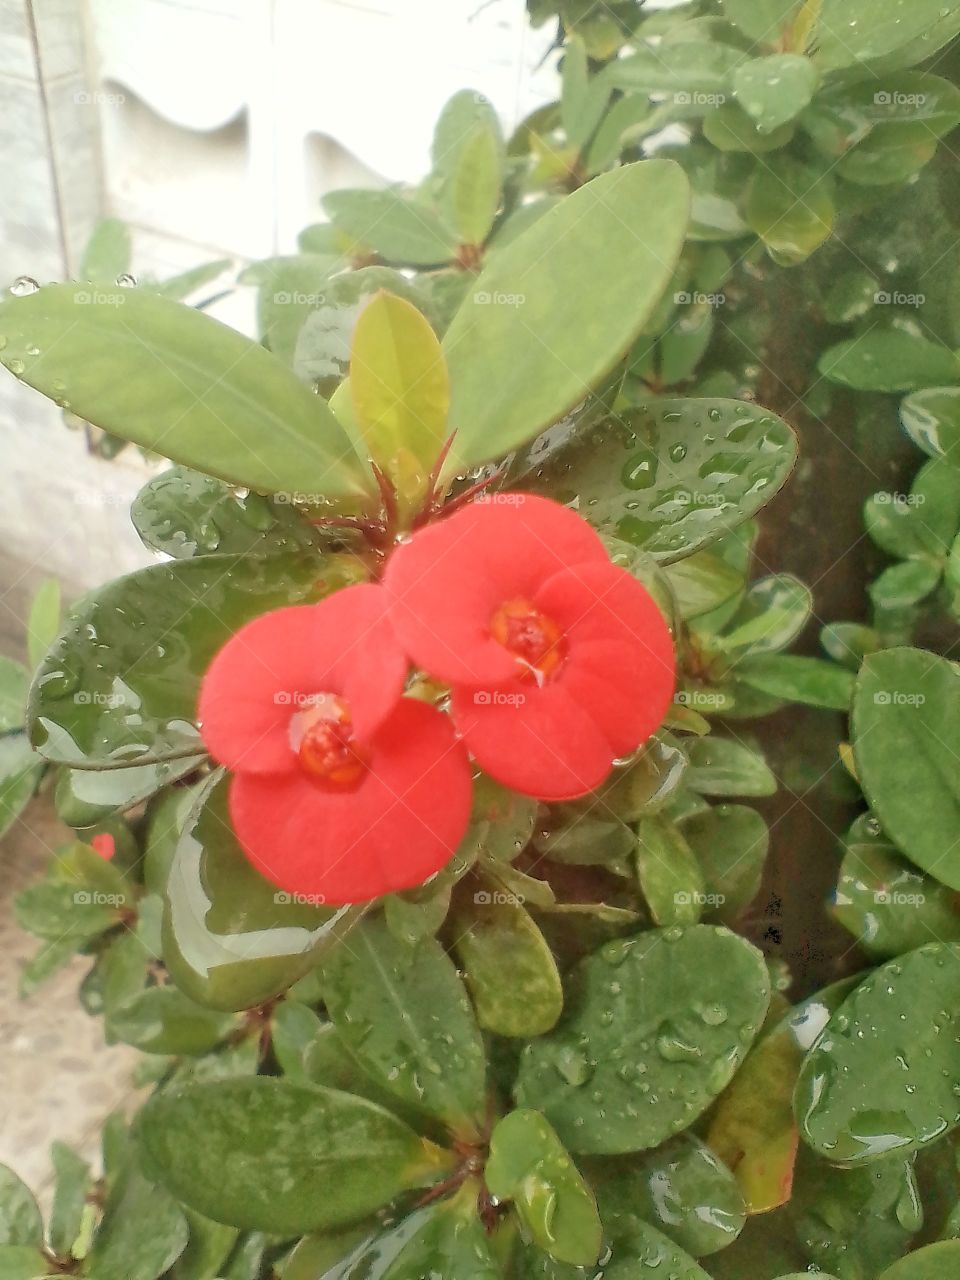 Crown of thorns or can be called euphorbia milli which grows in the mosque's garden